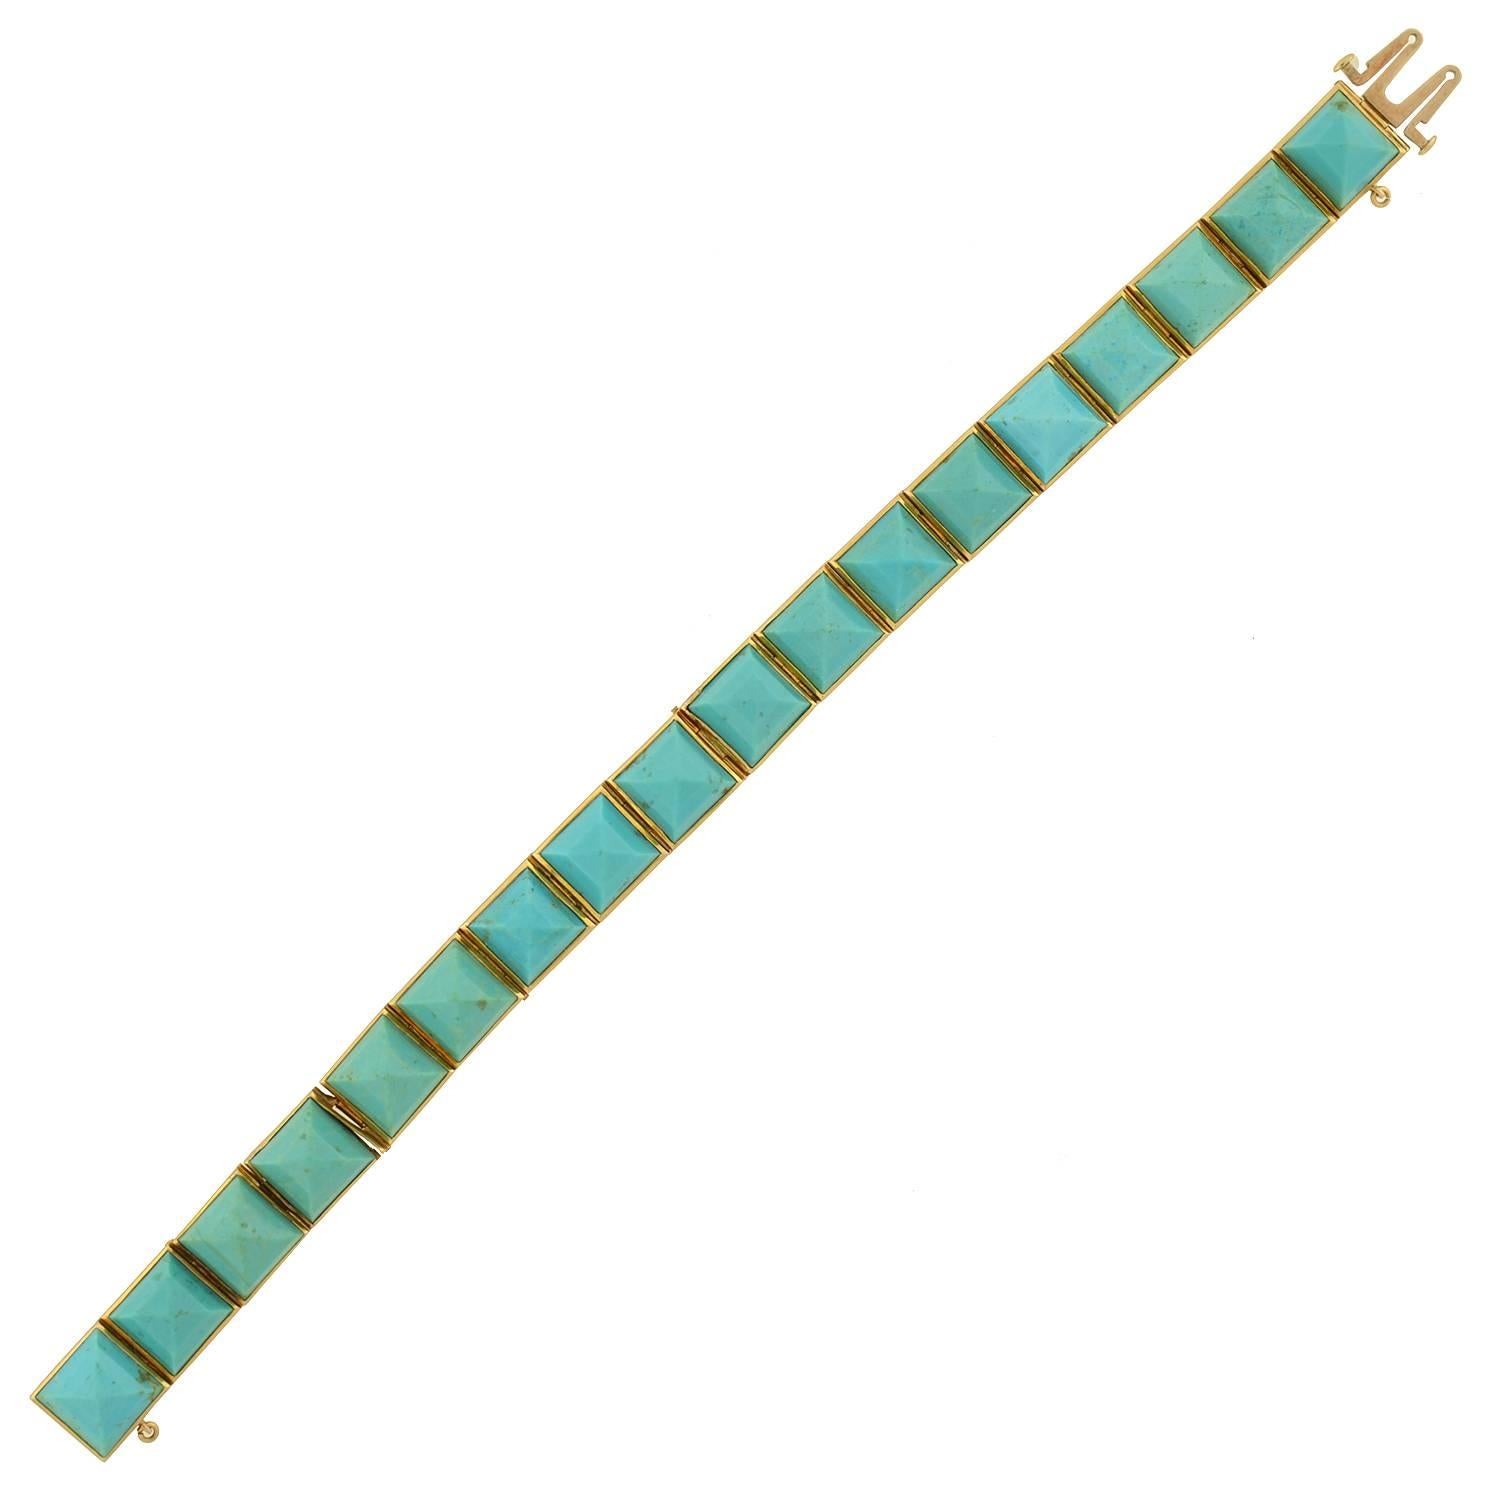 A simply stunning turquoise link bracelet from the Victorian (ca1880) era! Set in 18kt yellow gold, this unusual bracelet is comprised of 18 carved natural turquoise links, which wrap around the entire length of the piece, forming a straight but